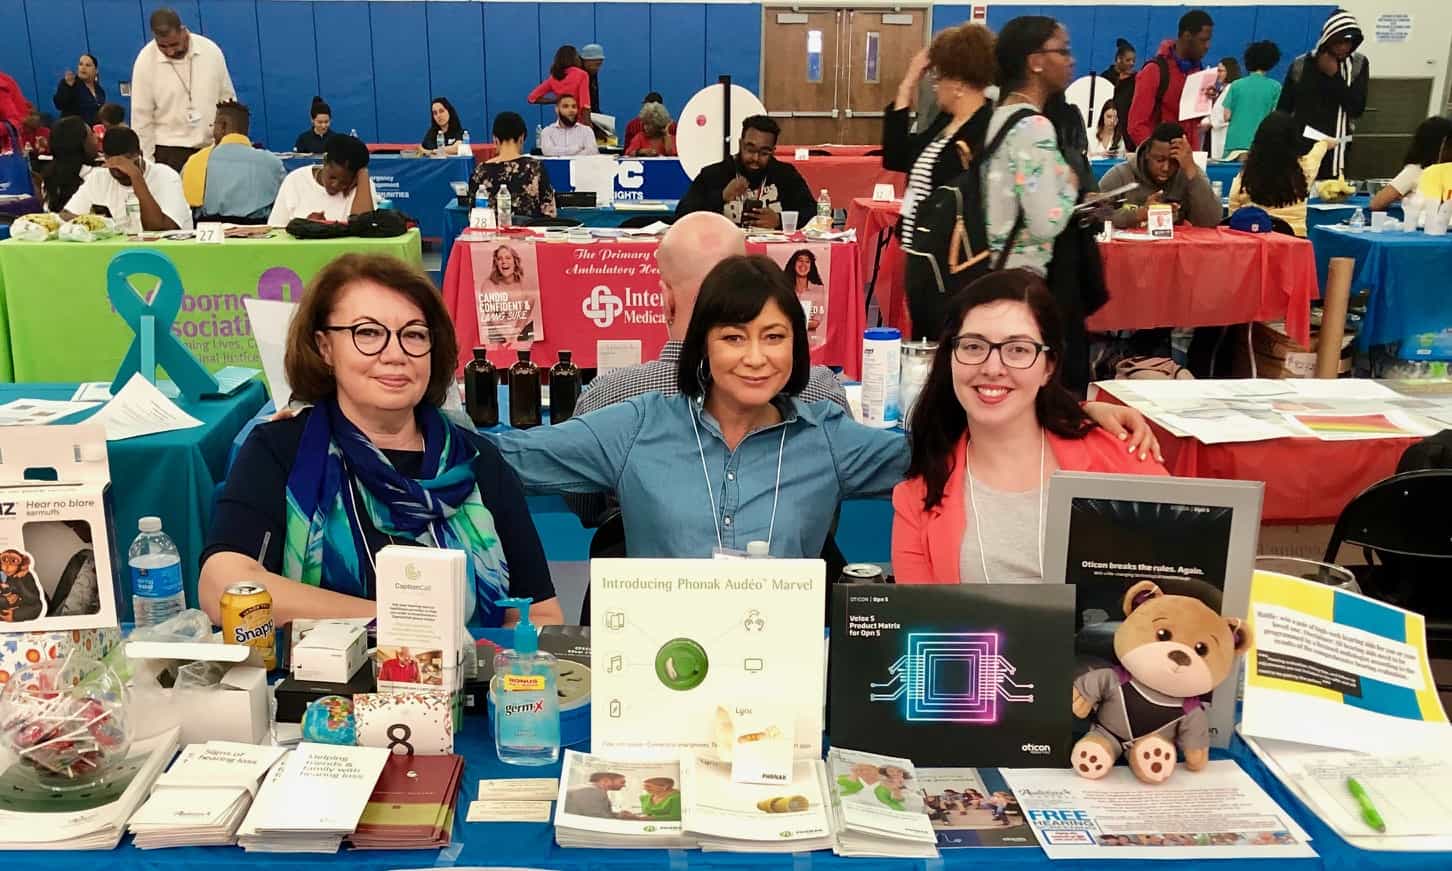 Audiology Central at a health expo in Brooklyn, NY